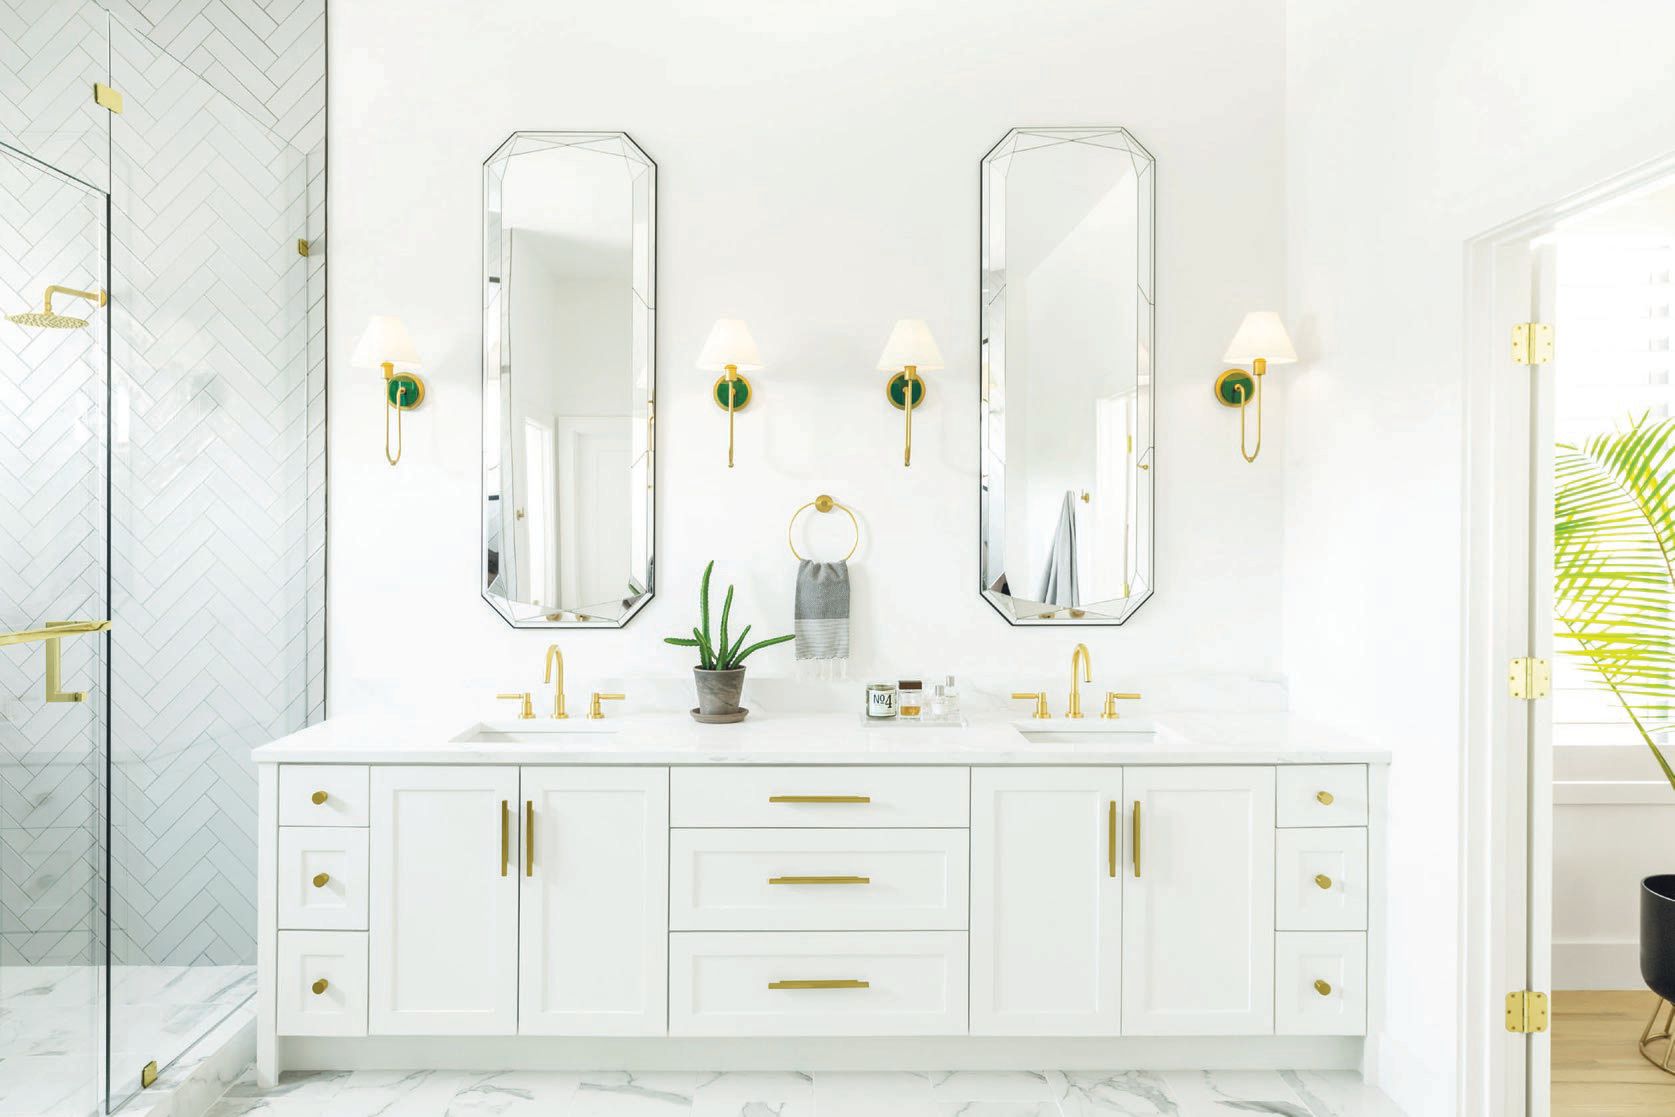 His-and-her sinks make for optimal spacing. PHOTO BY MICHAEL WILTBANK